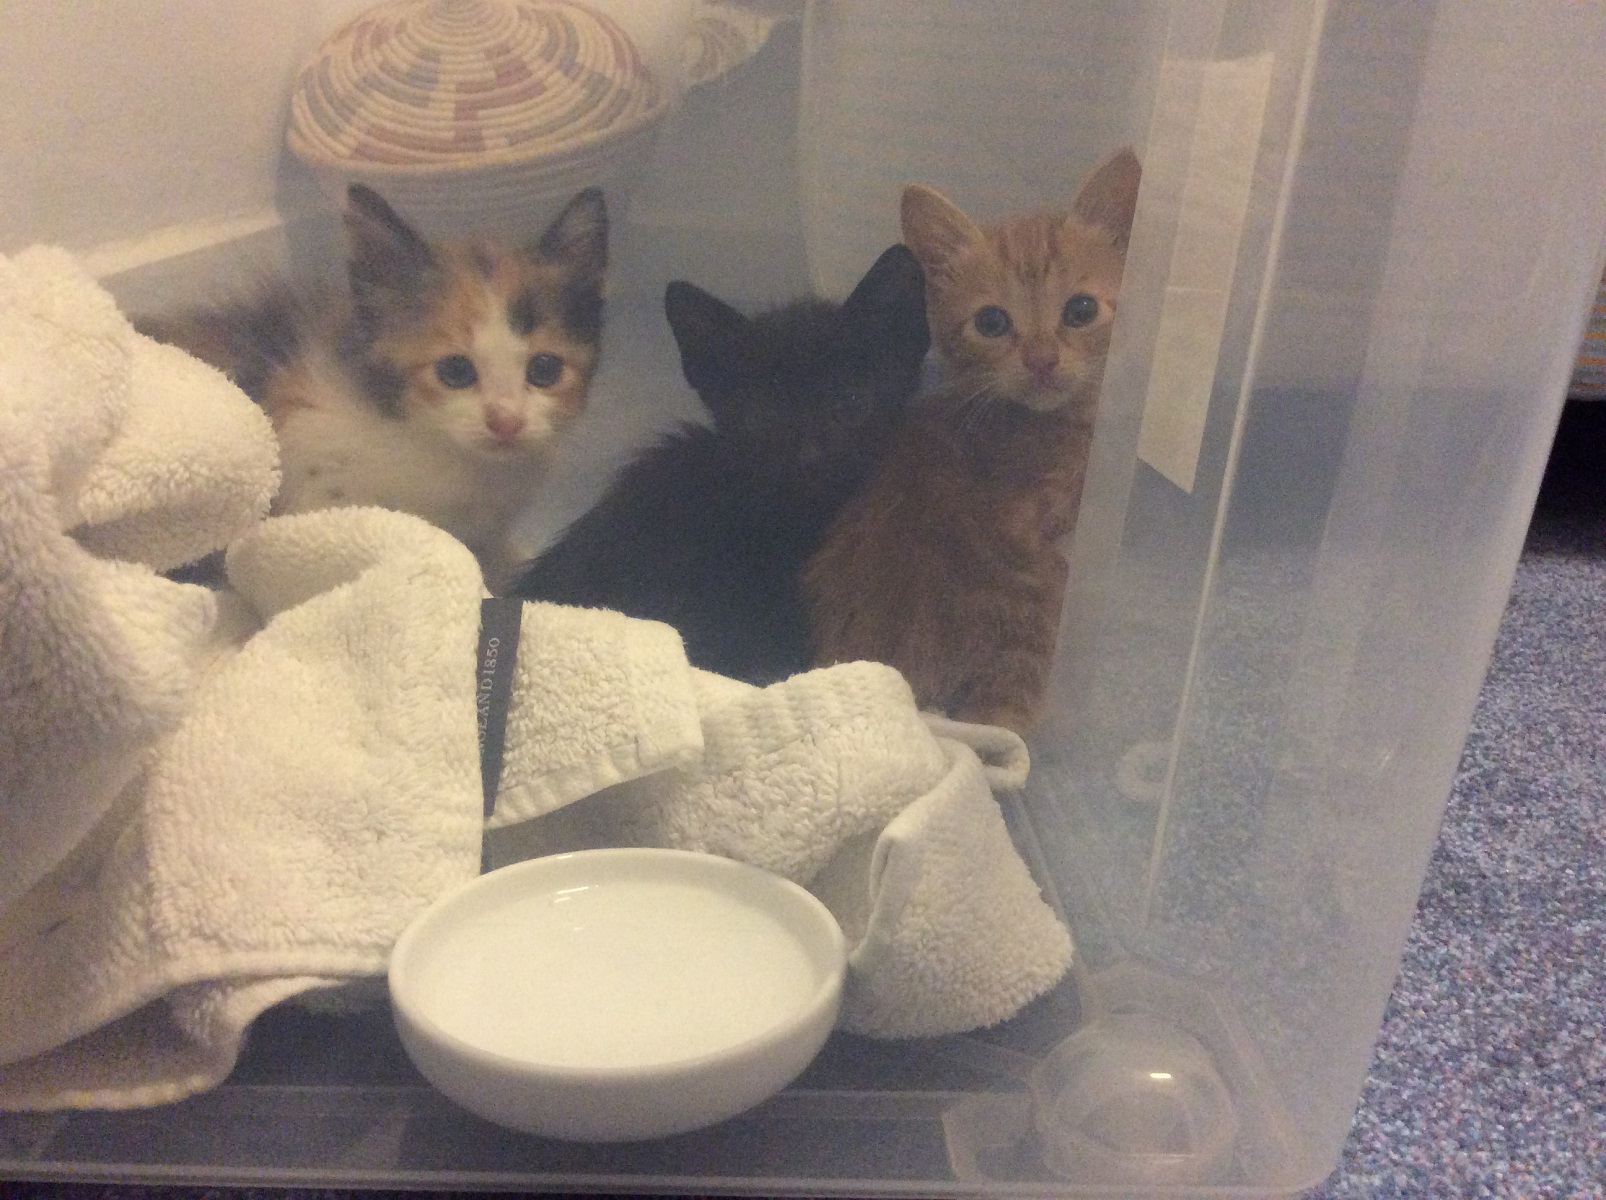 We finally catch the terrified kittens